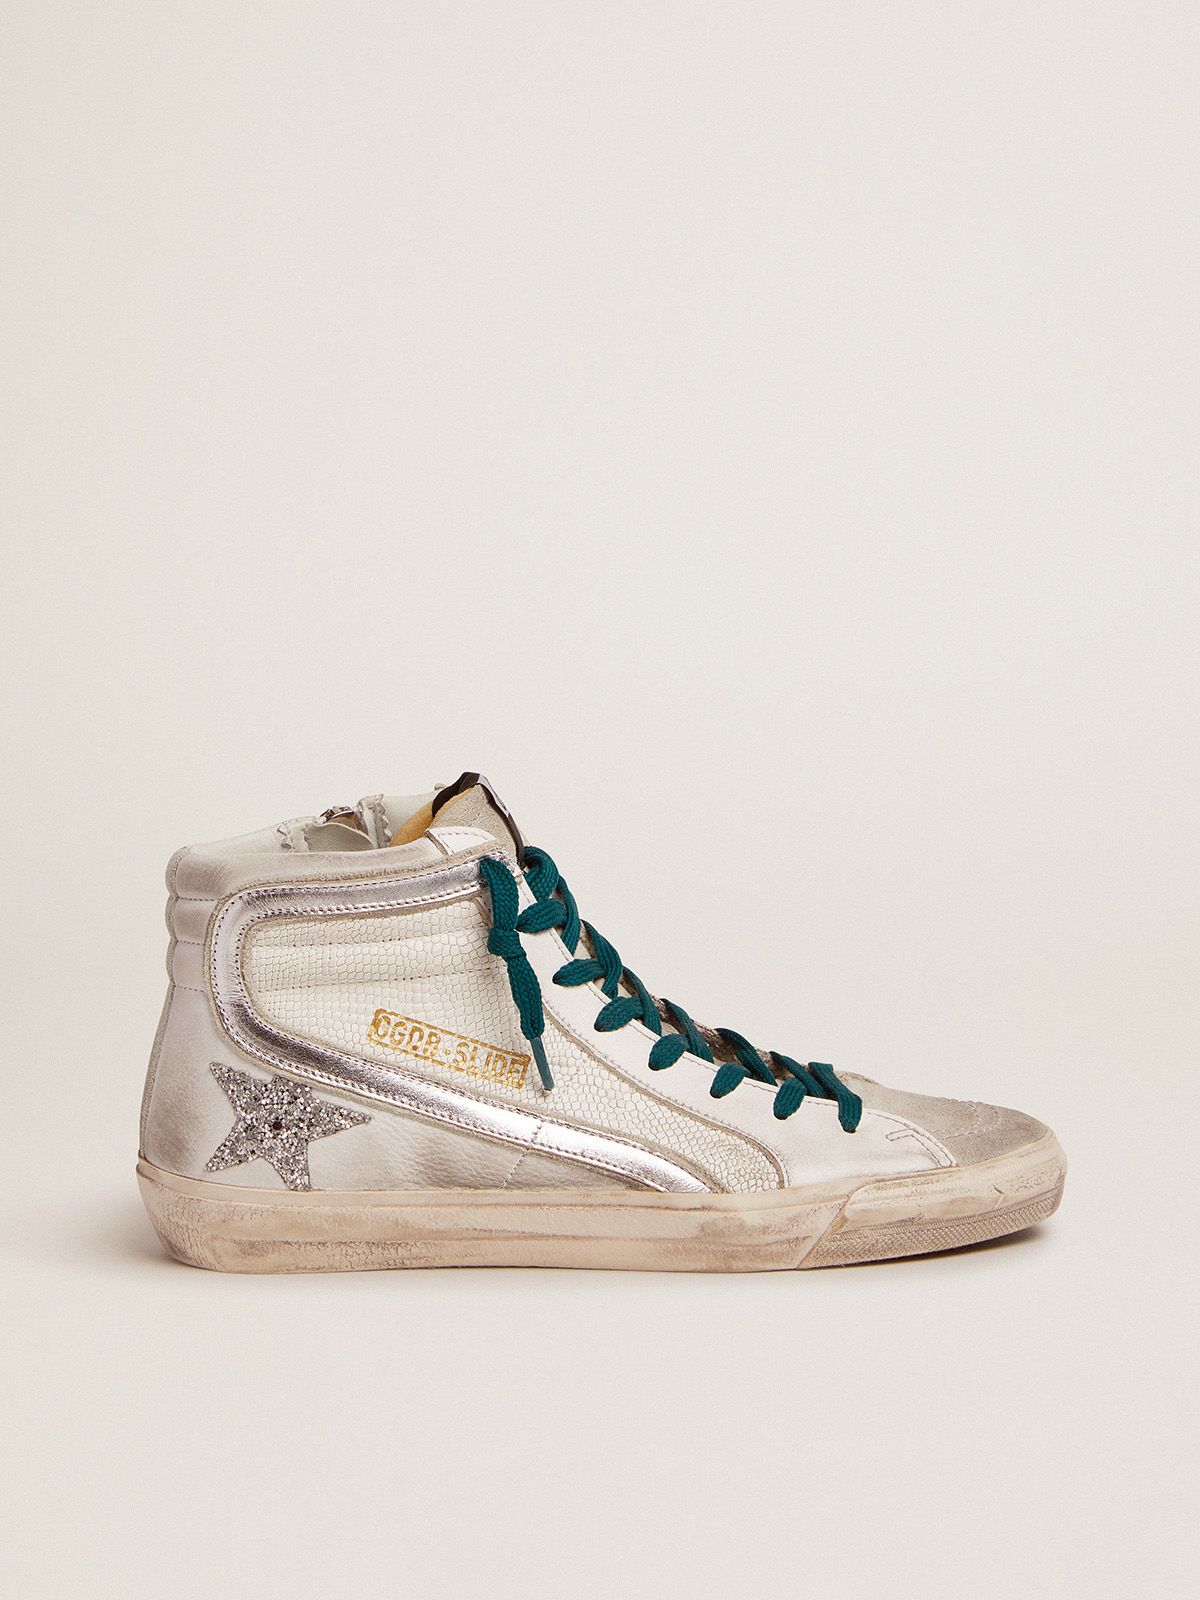 golden goose glitter Slide leather silver star upper and sneakers snake-print with